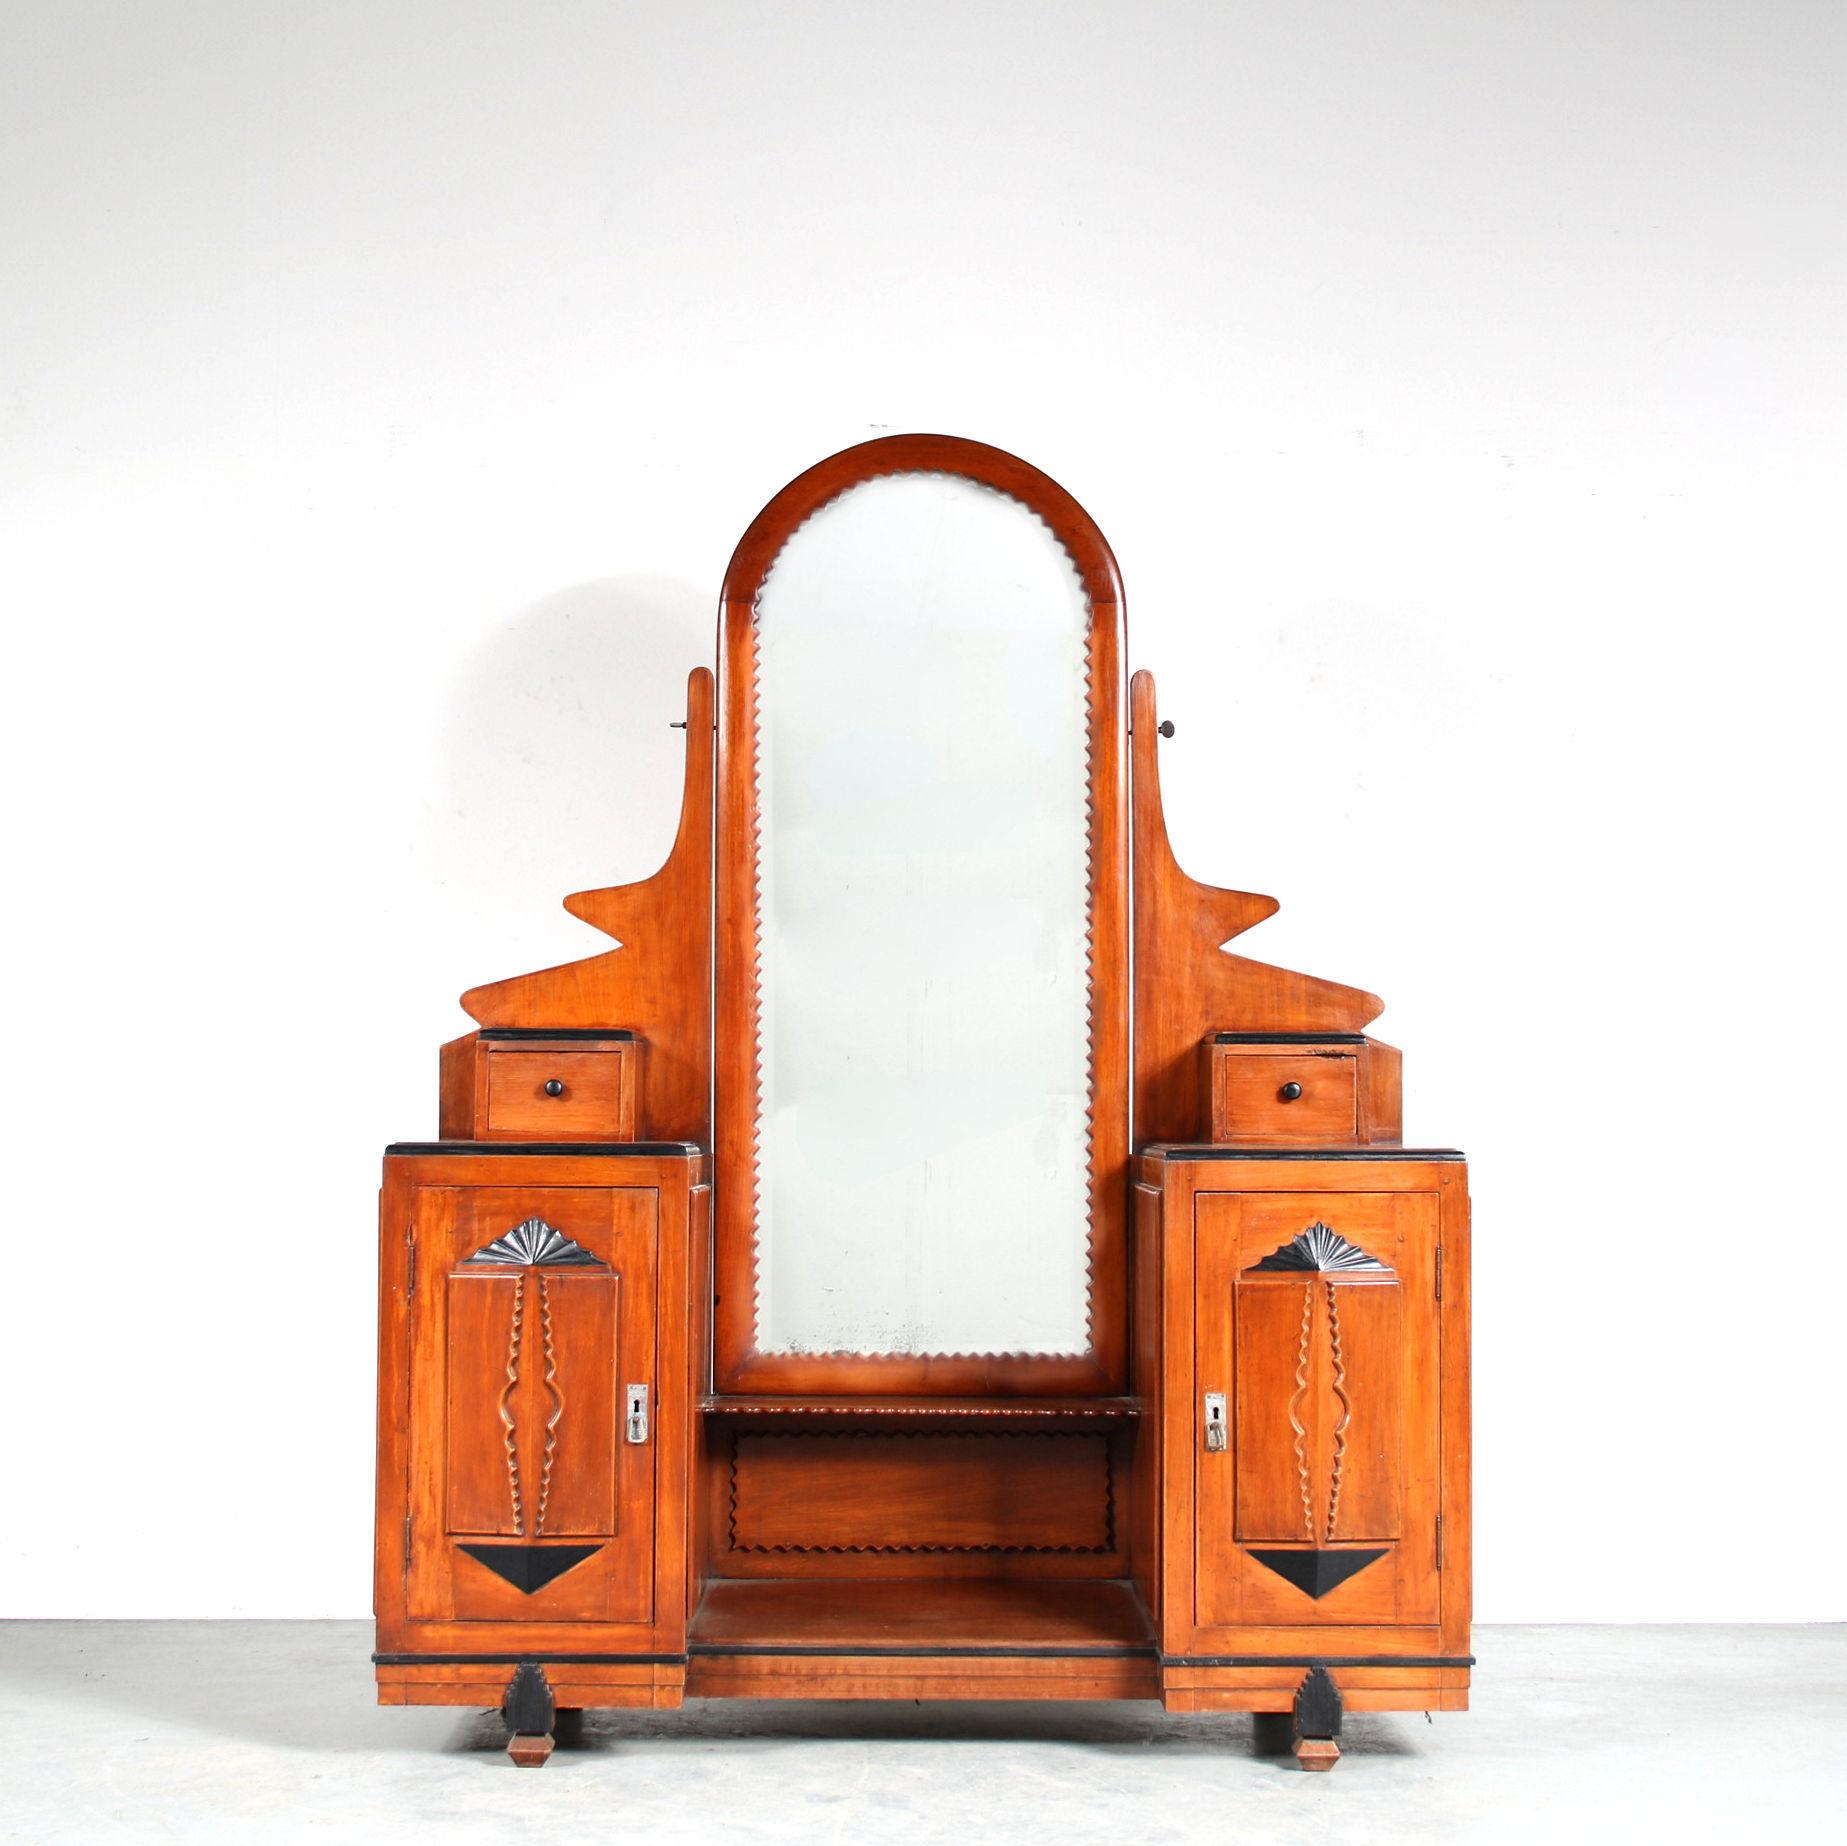 A colonial Amsterdam School dressing table, manufactured in the former Dutch East Indies, now Indonesia, around 1920.

This eye-catching piece is made of high quality wood in a nice warm brown colour. The centre of the piece holds a tall mirror in